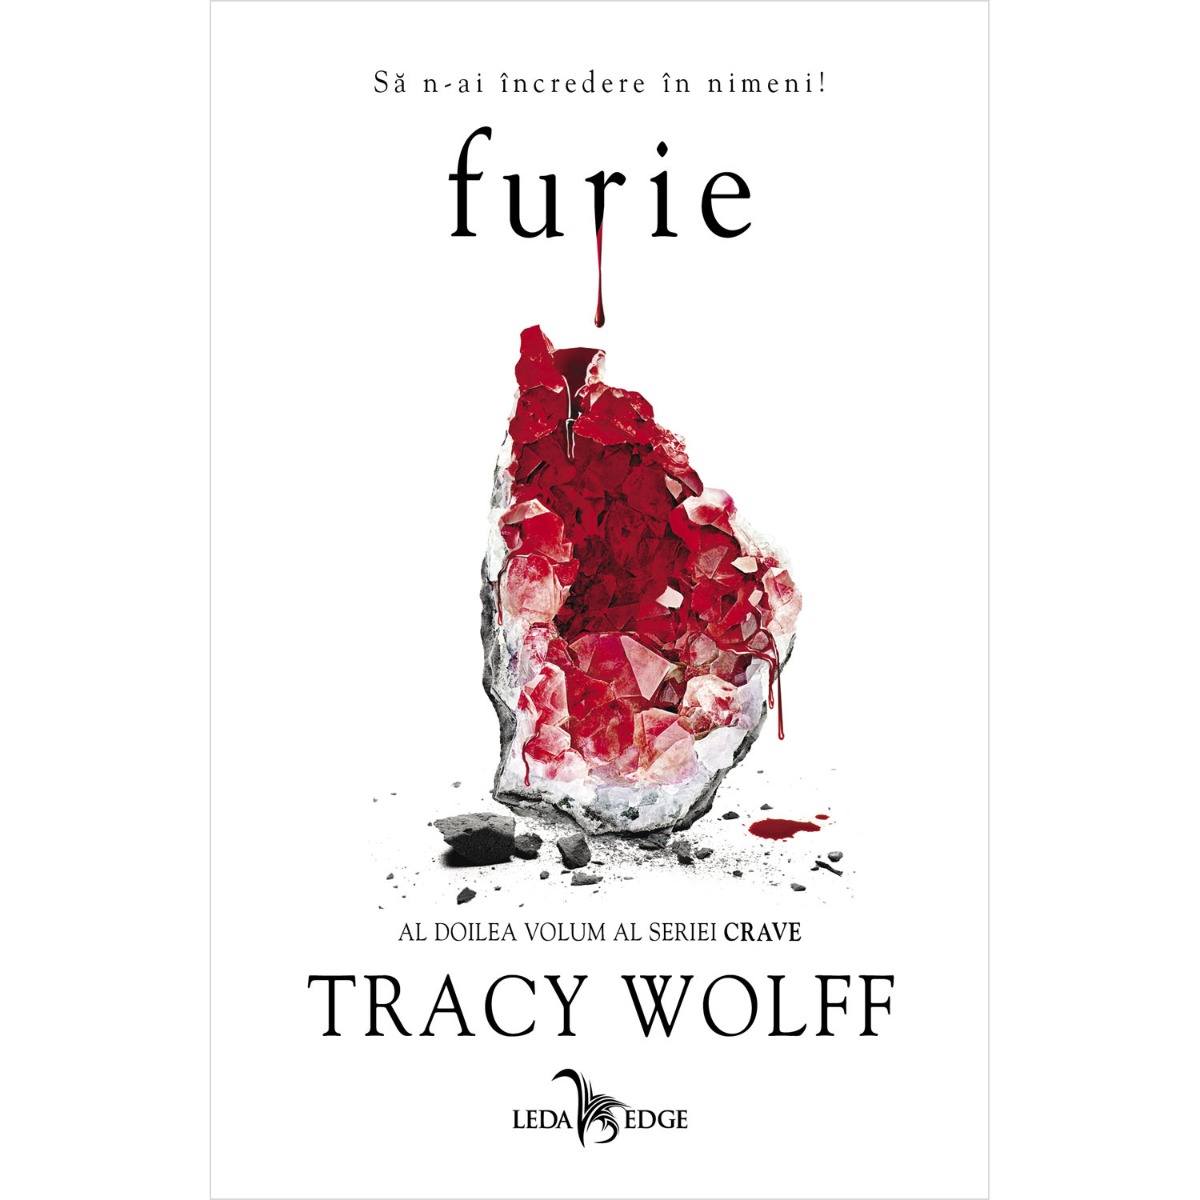 Furie, Crave vol. 2, Tracy Wolff Corint